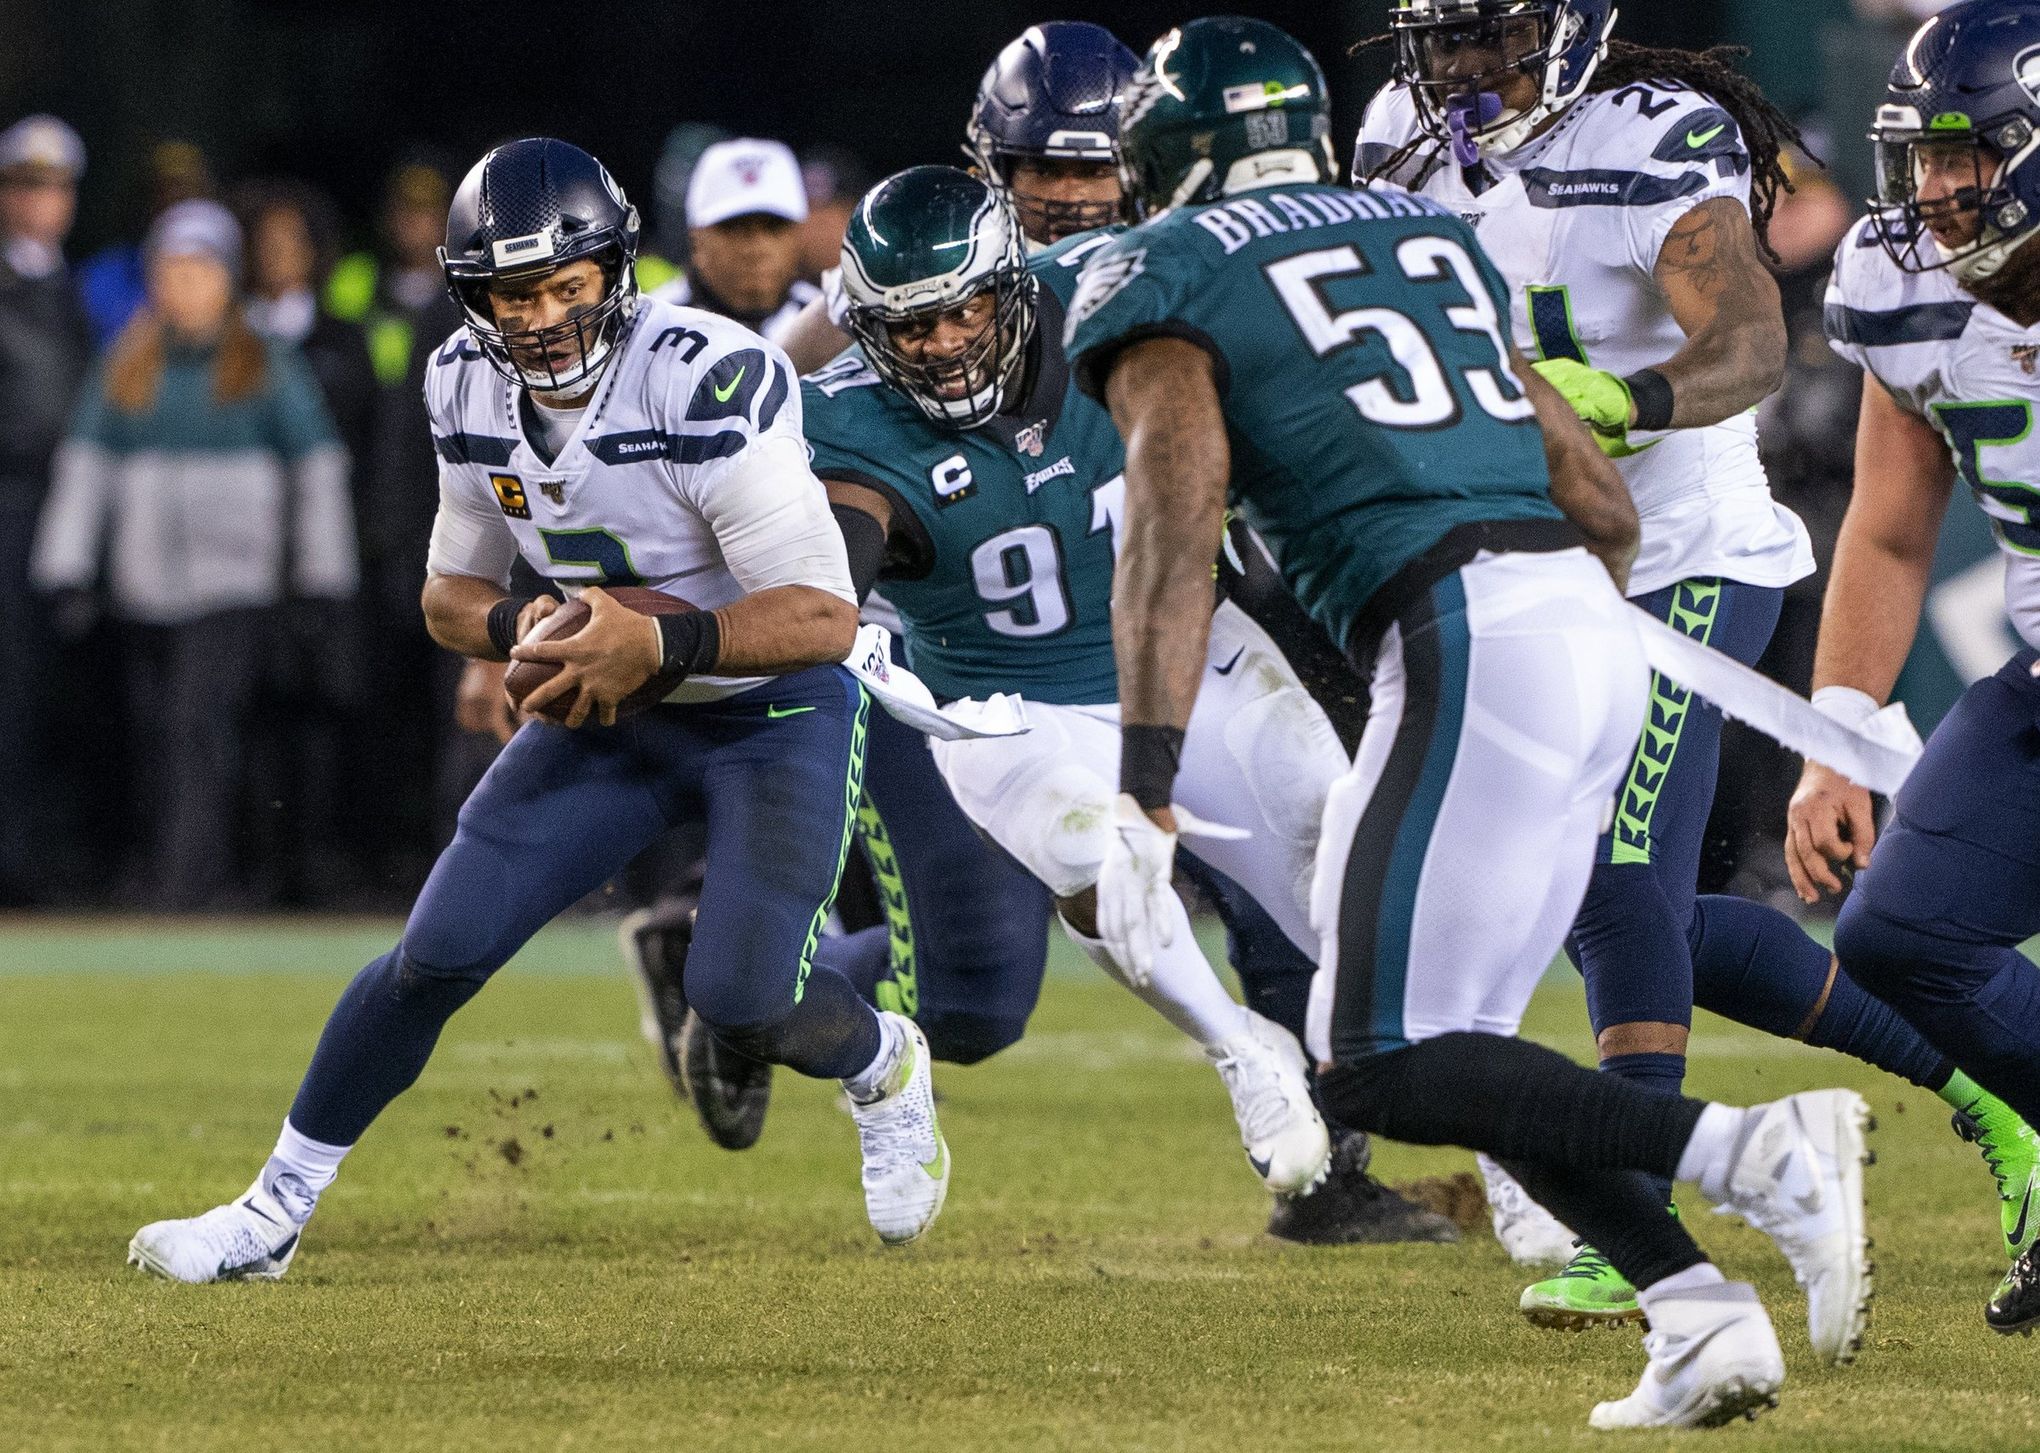 Monday Night Football: How to watch the Seattle Seahawks vs. New